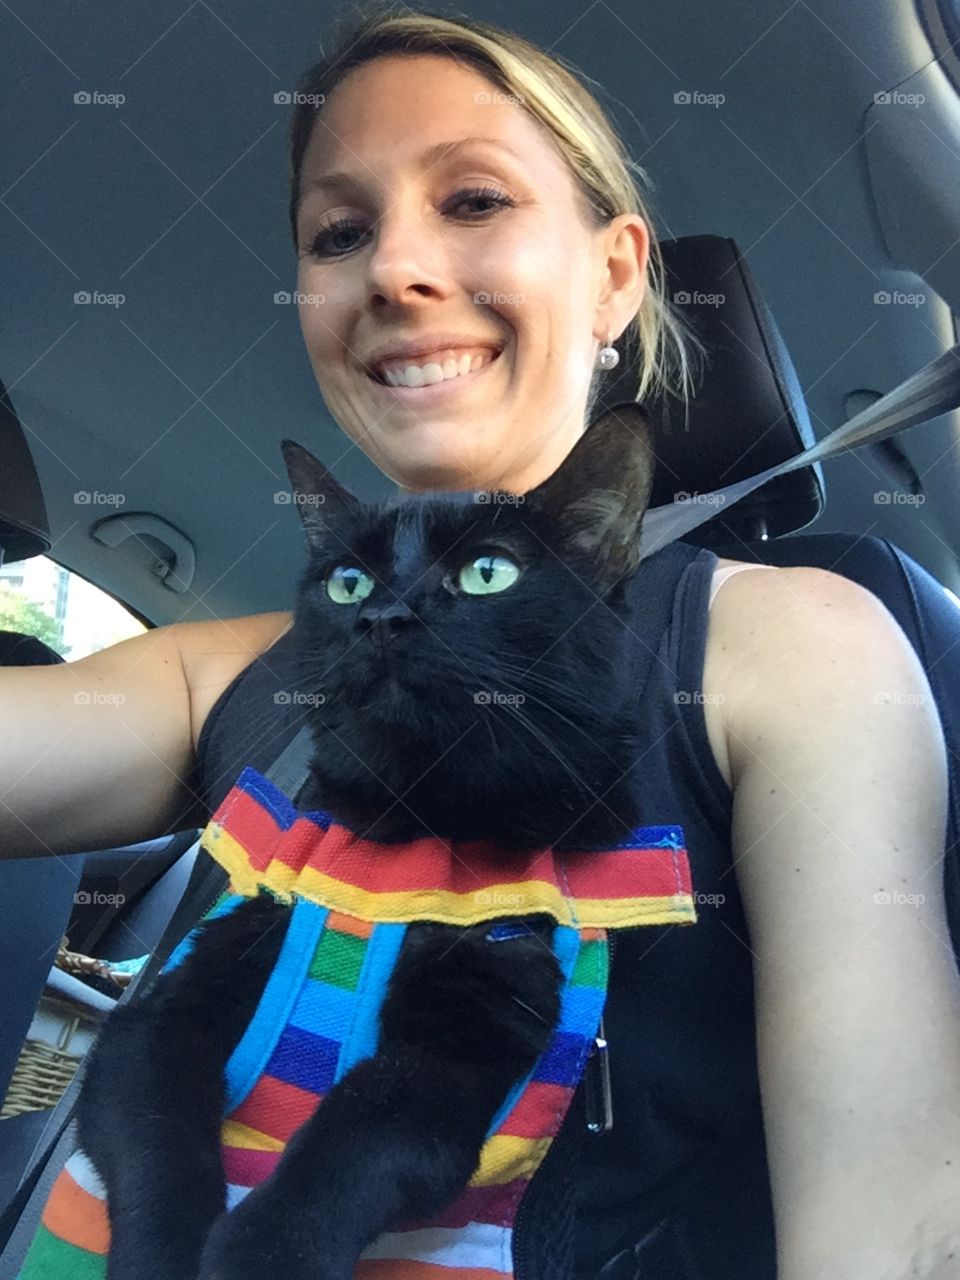 Kitty going for a car ride with mommy